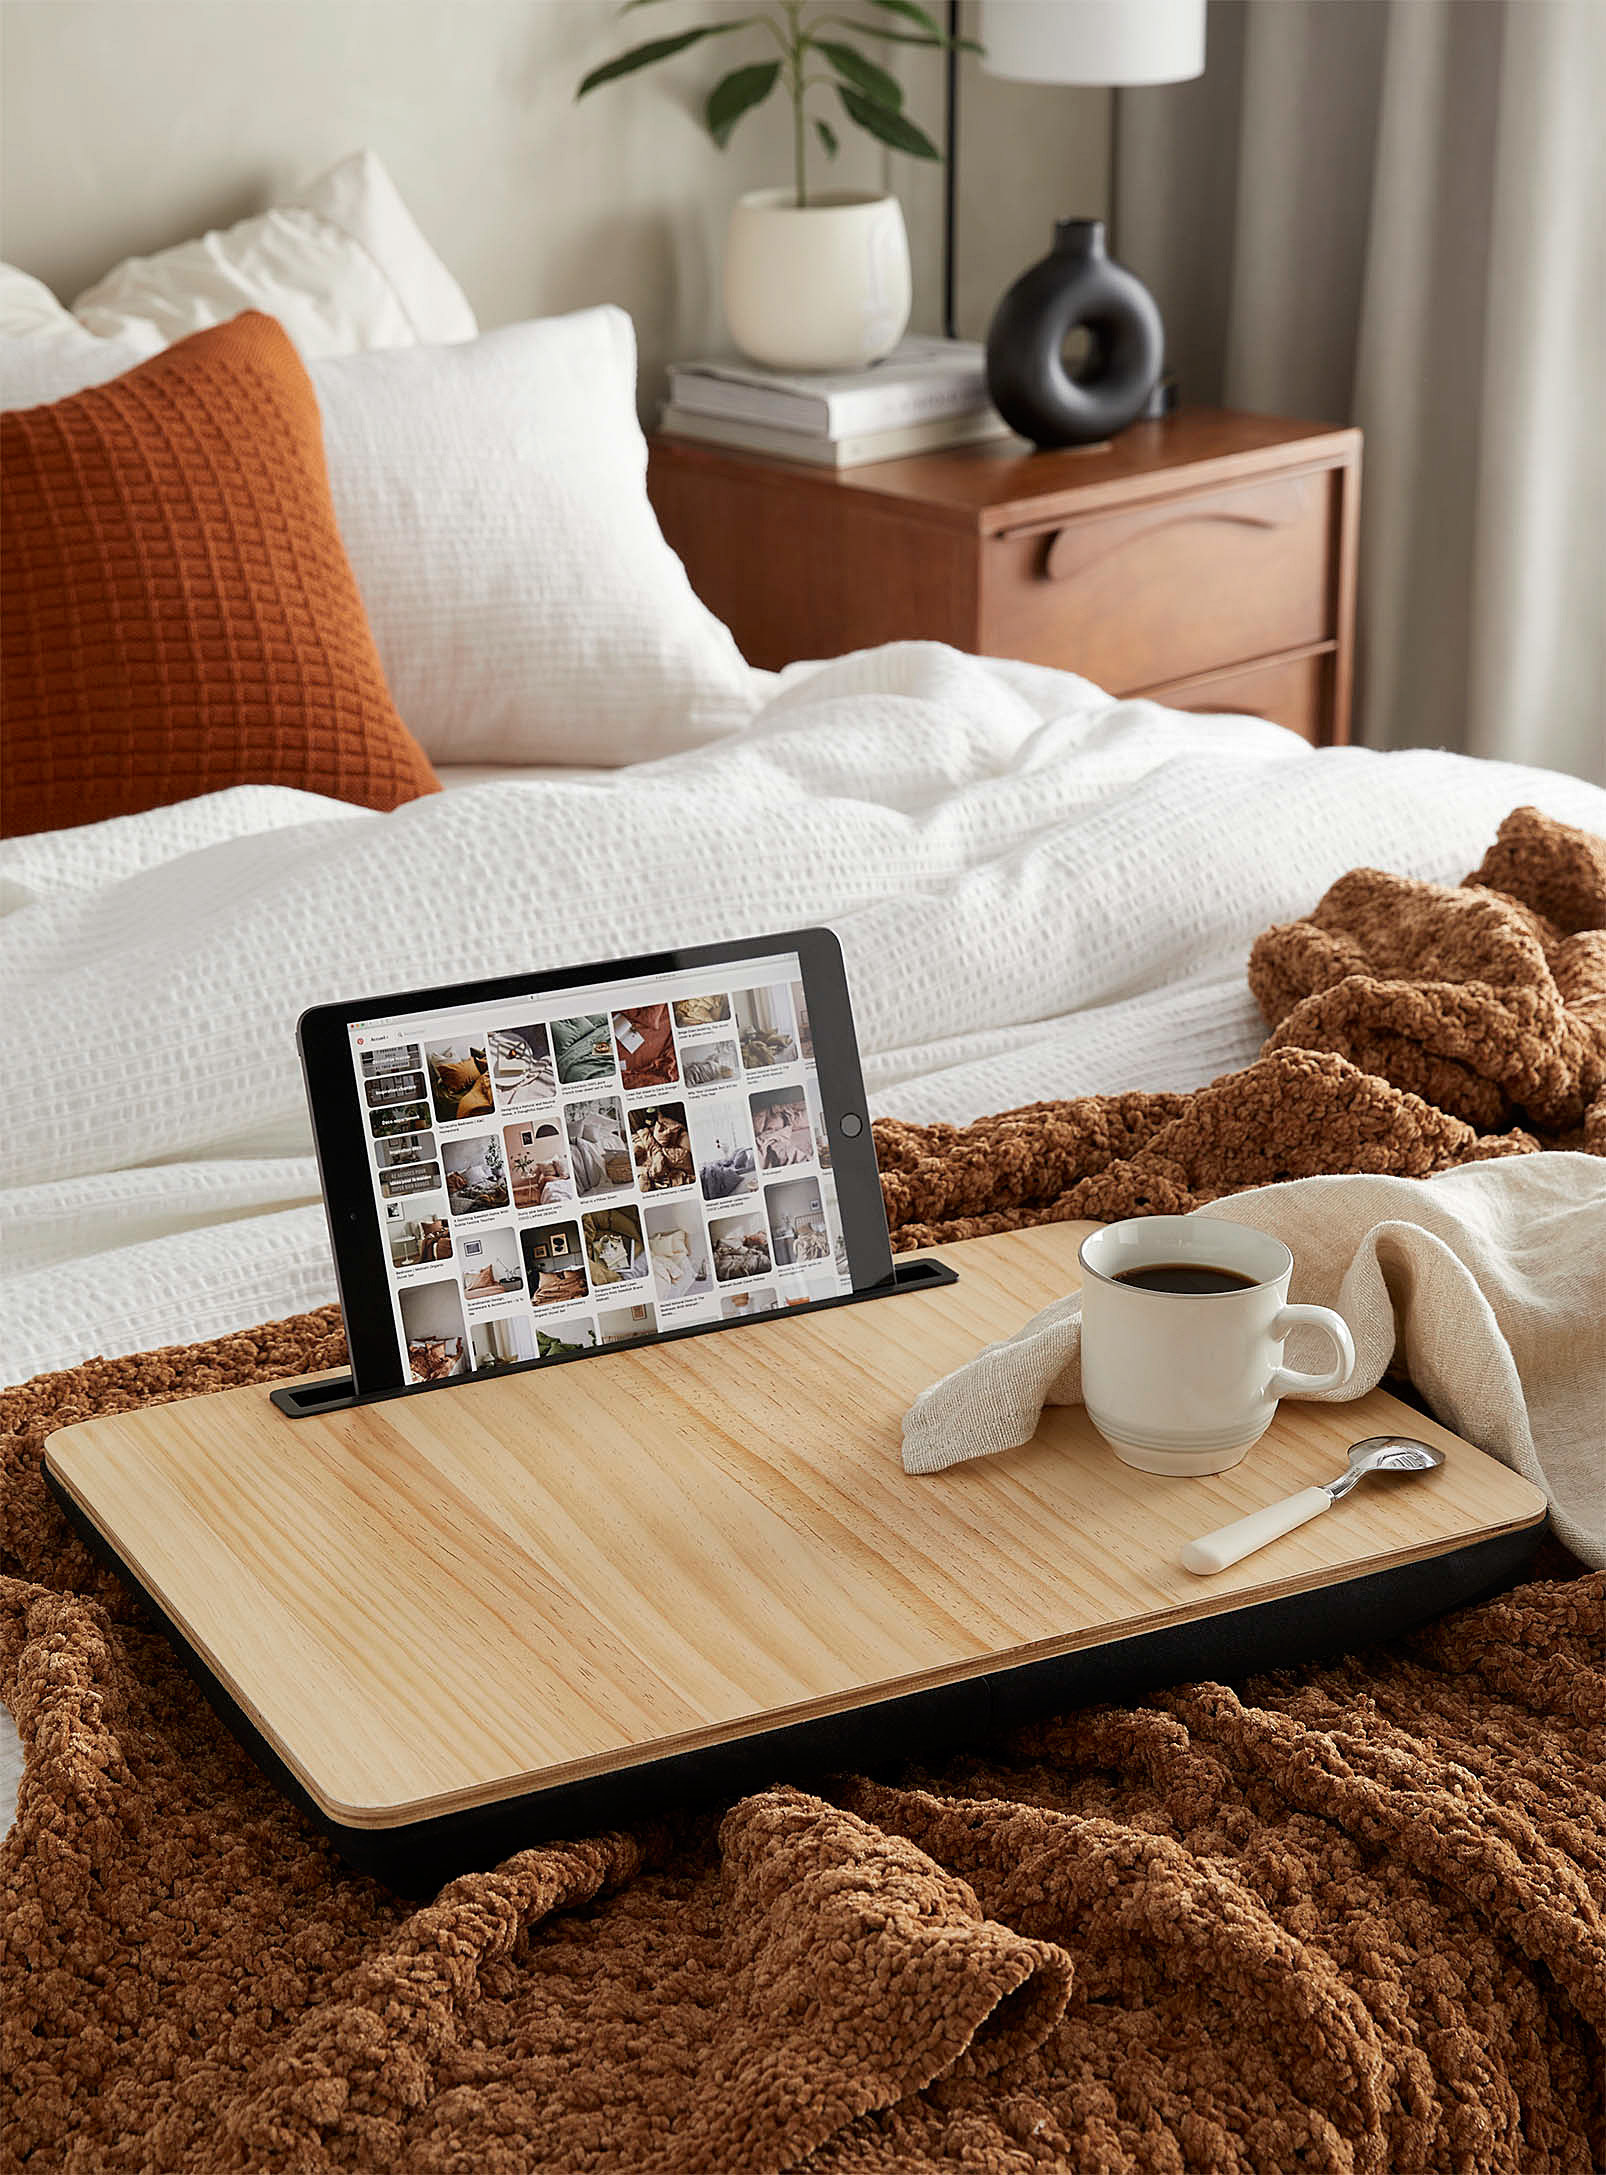 the lap desk on a bed with a coffee and a tablet